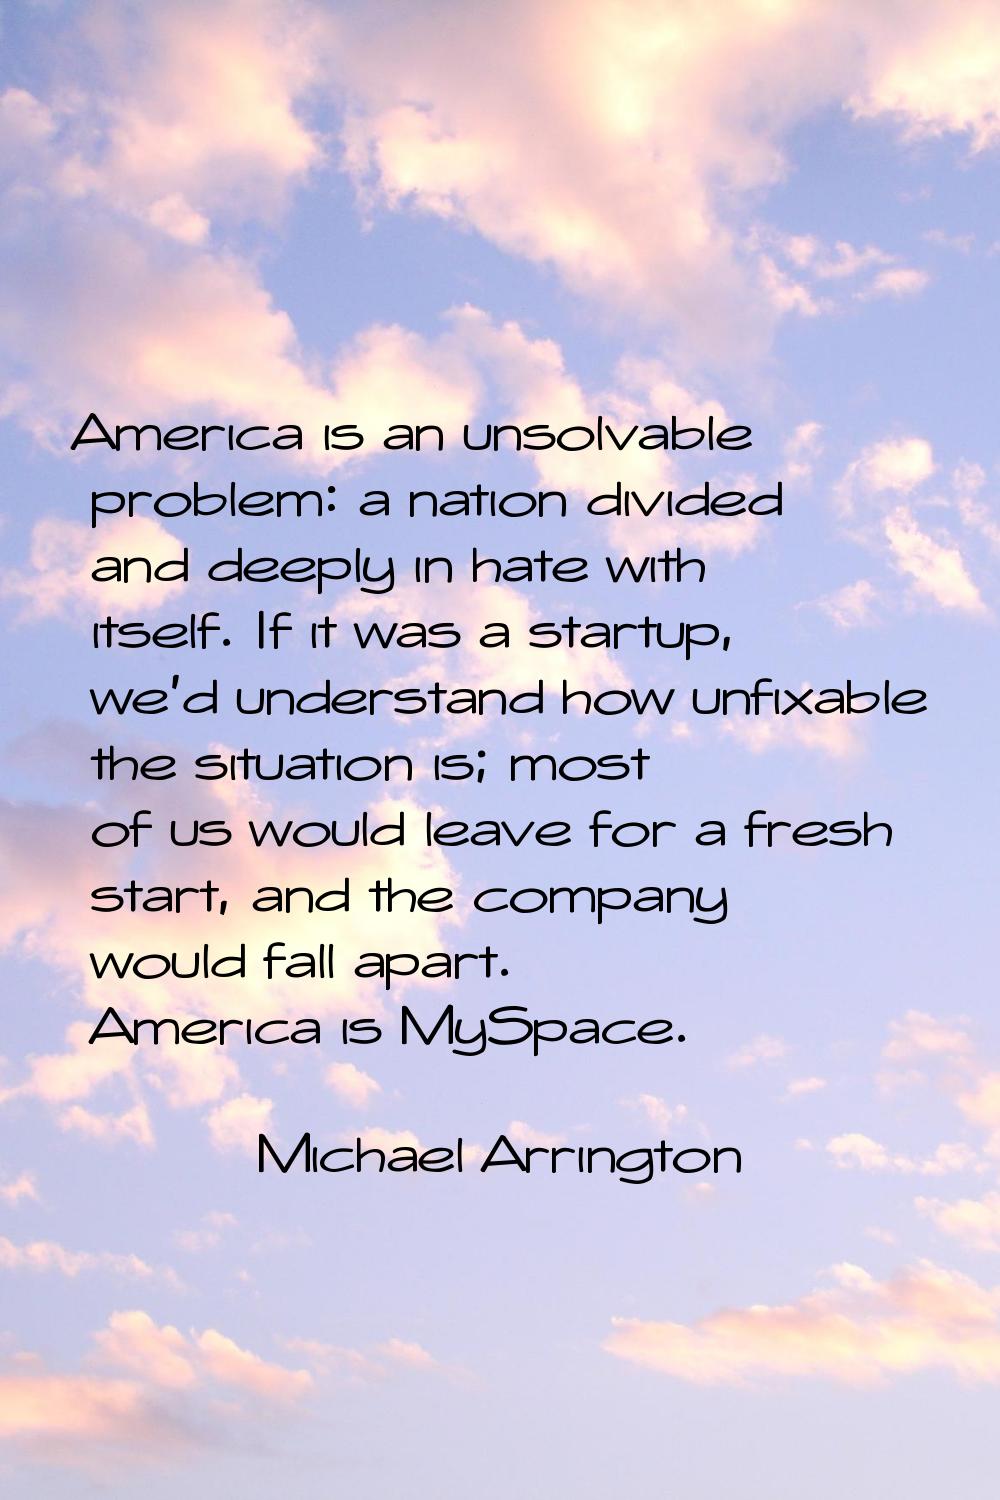 America is an unsolvable problem: a nation divided and deeply in hate with itself. If it was a star